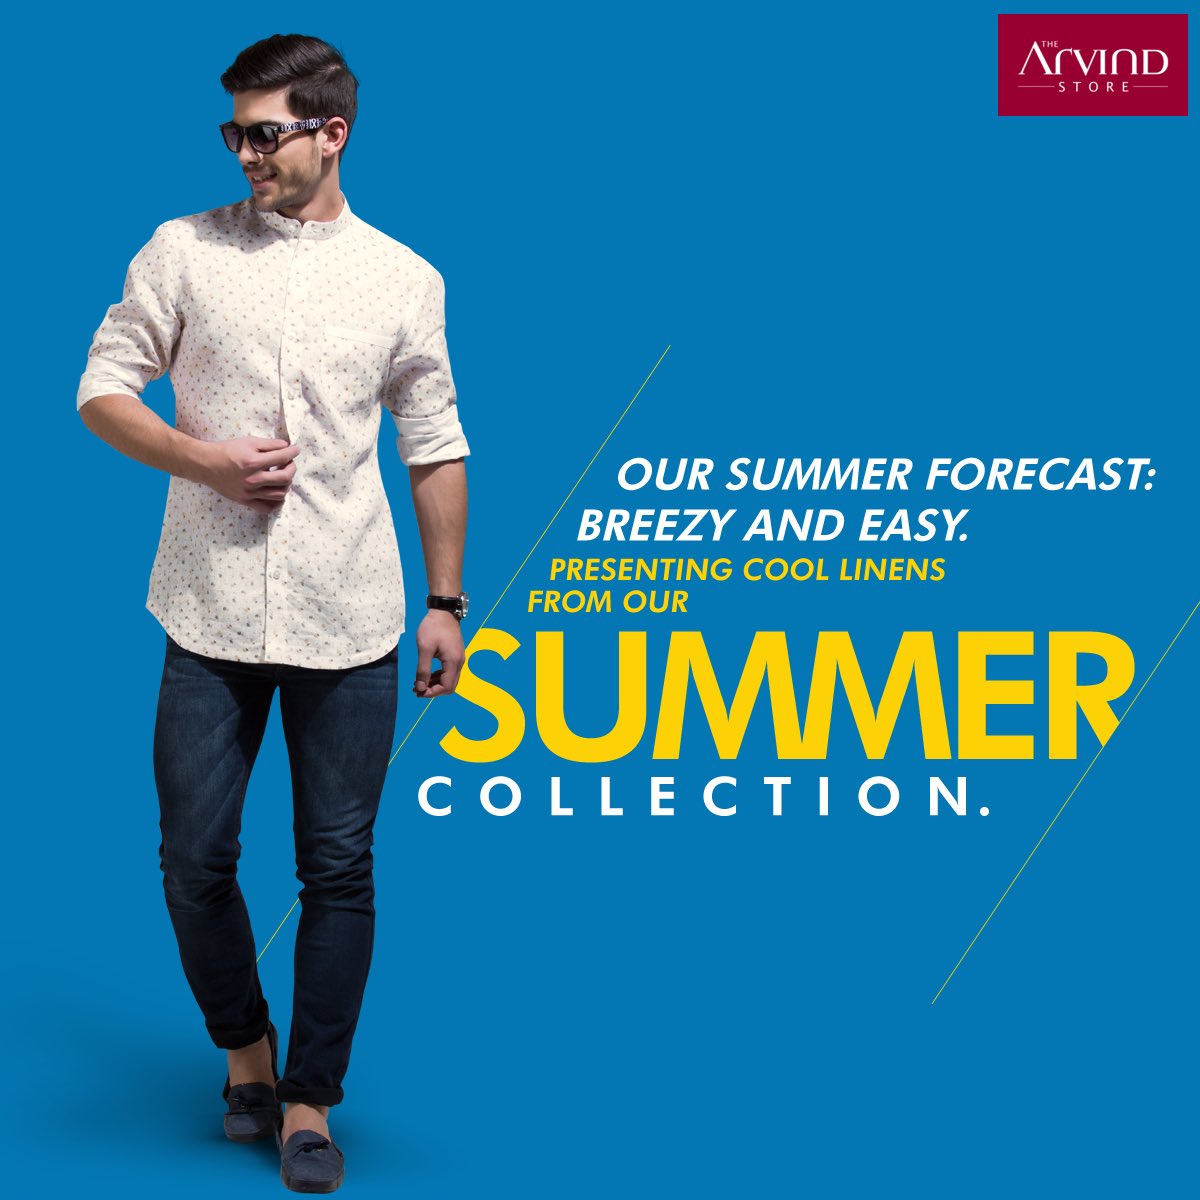 Get the temperatures soaring with a cool linen ensemble. Shop for 2999 & get 30% off on tailoring services T&C Apply https://t.co/oVKxFpc2PP